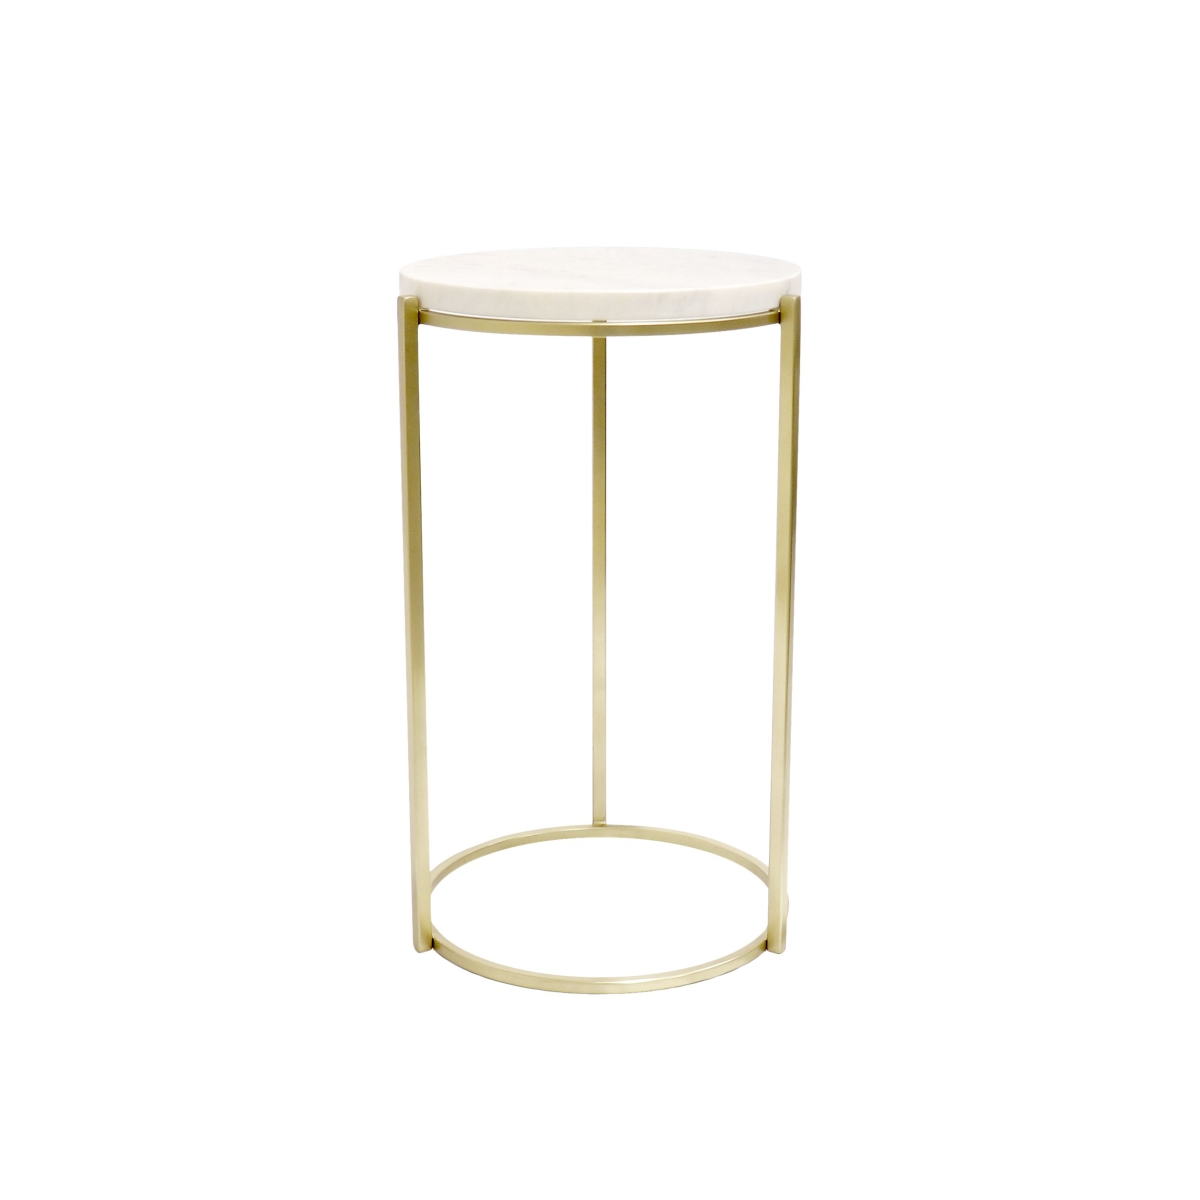 Psac-148 Carina Round Side Table, Stainless Steel Frame With Marble Top